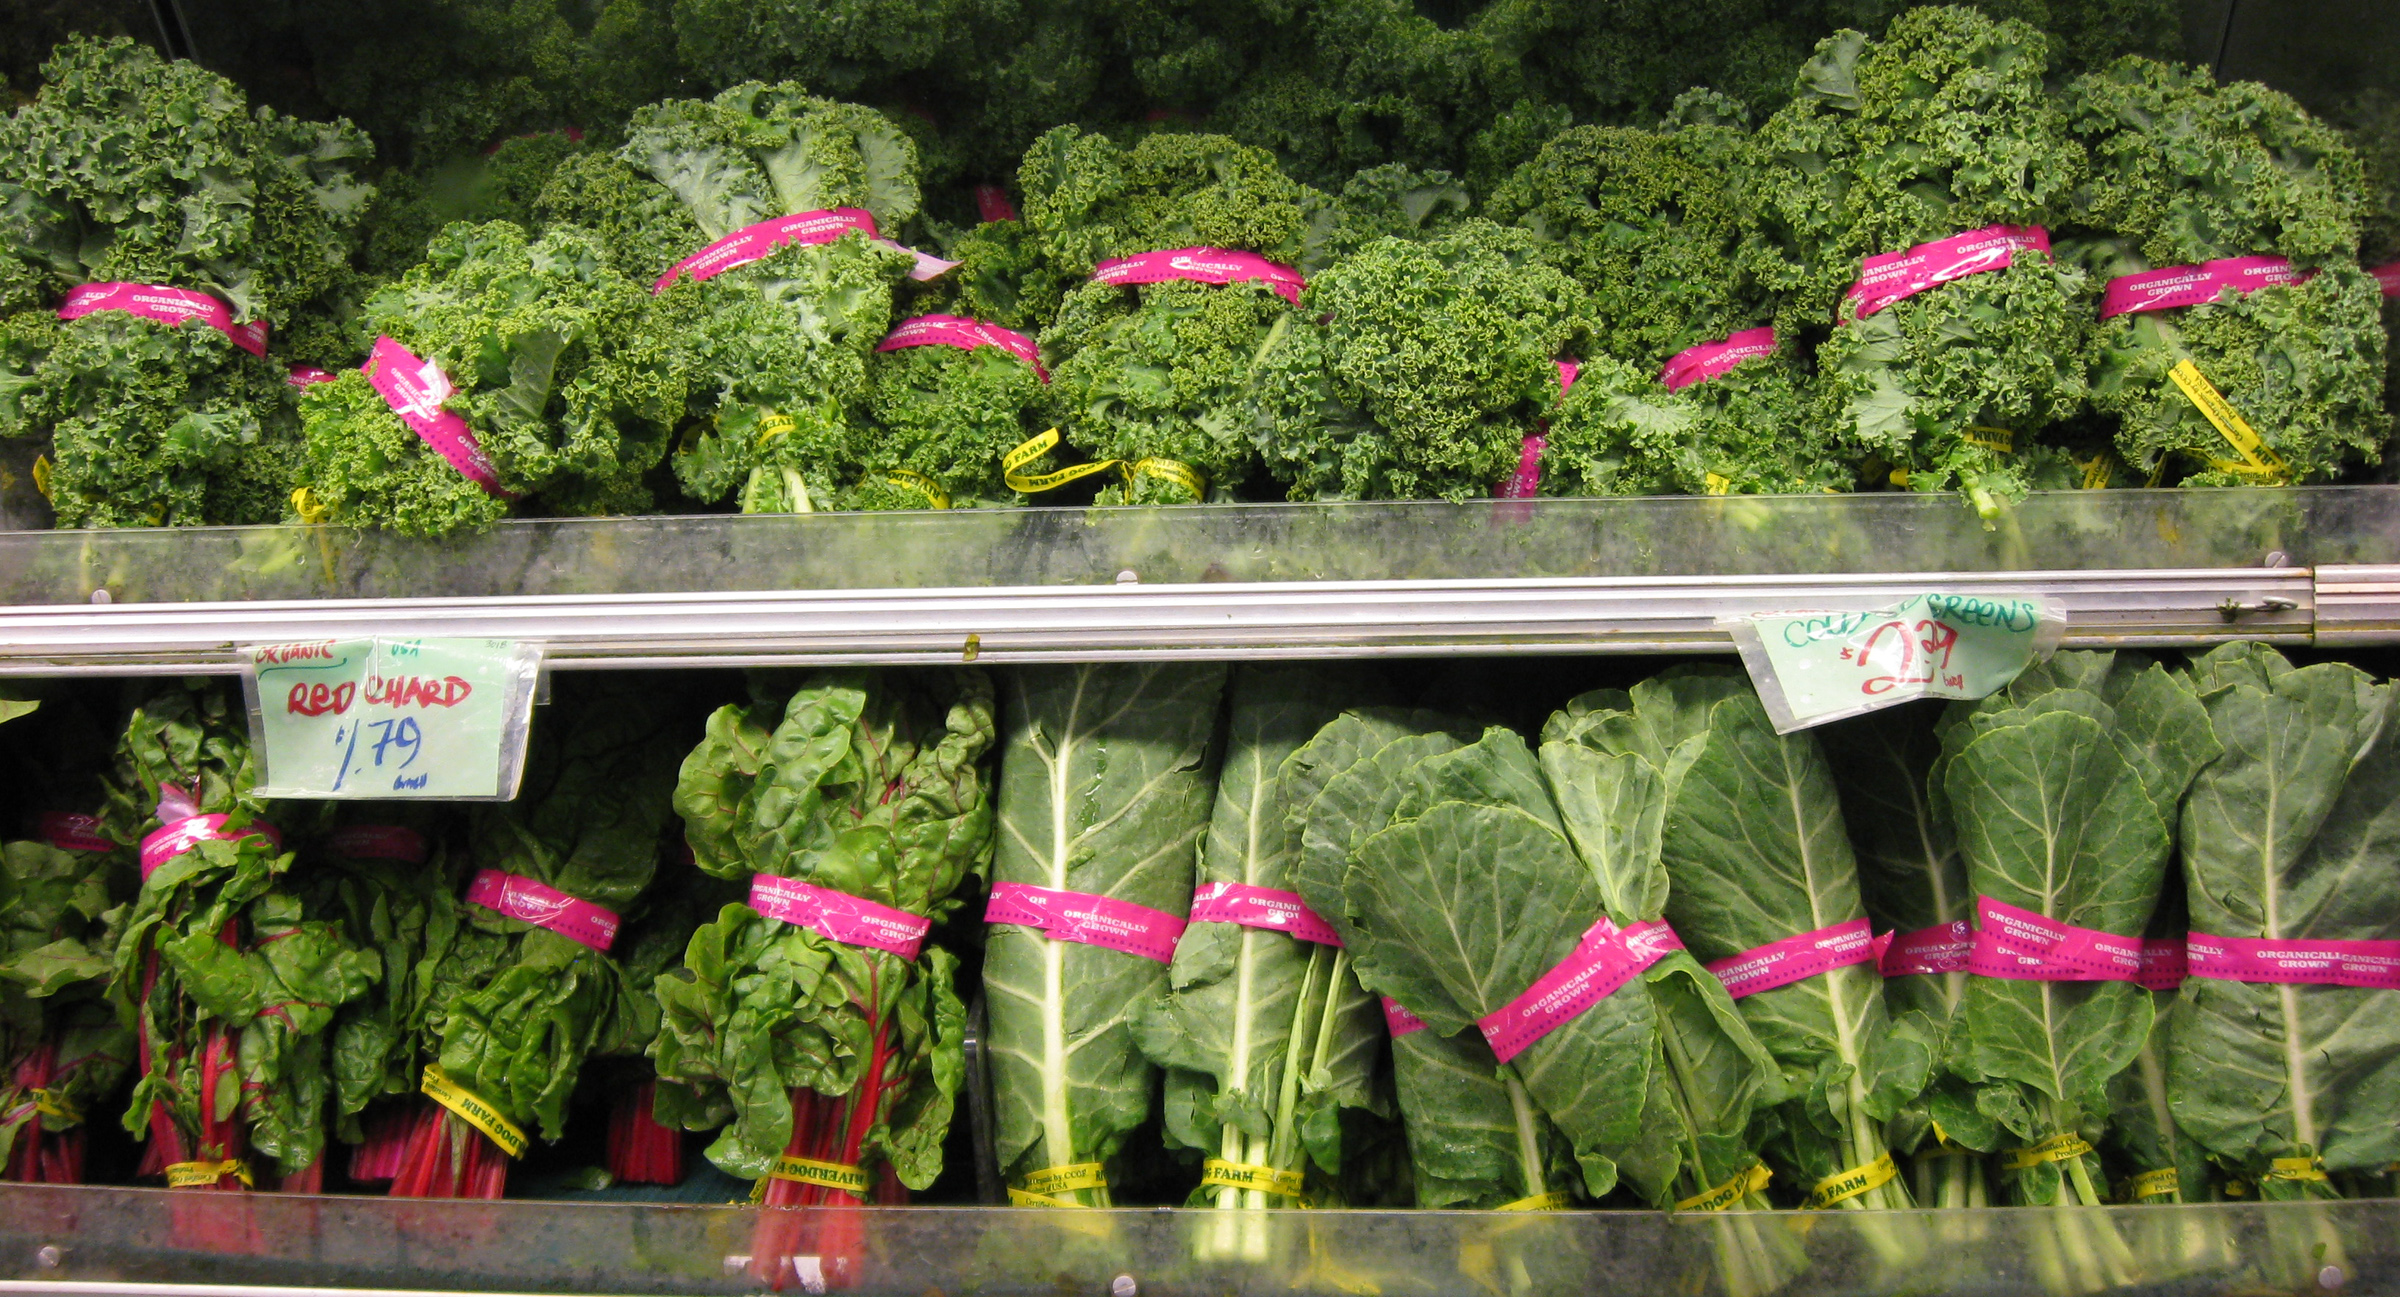 Can rabbits eat fresh greens from the supermarket?